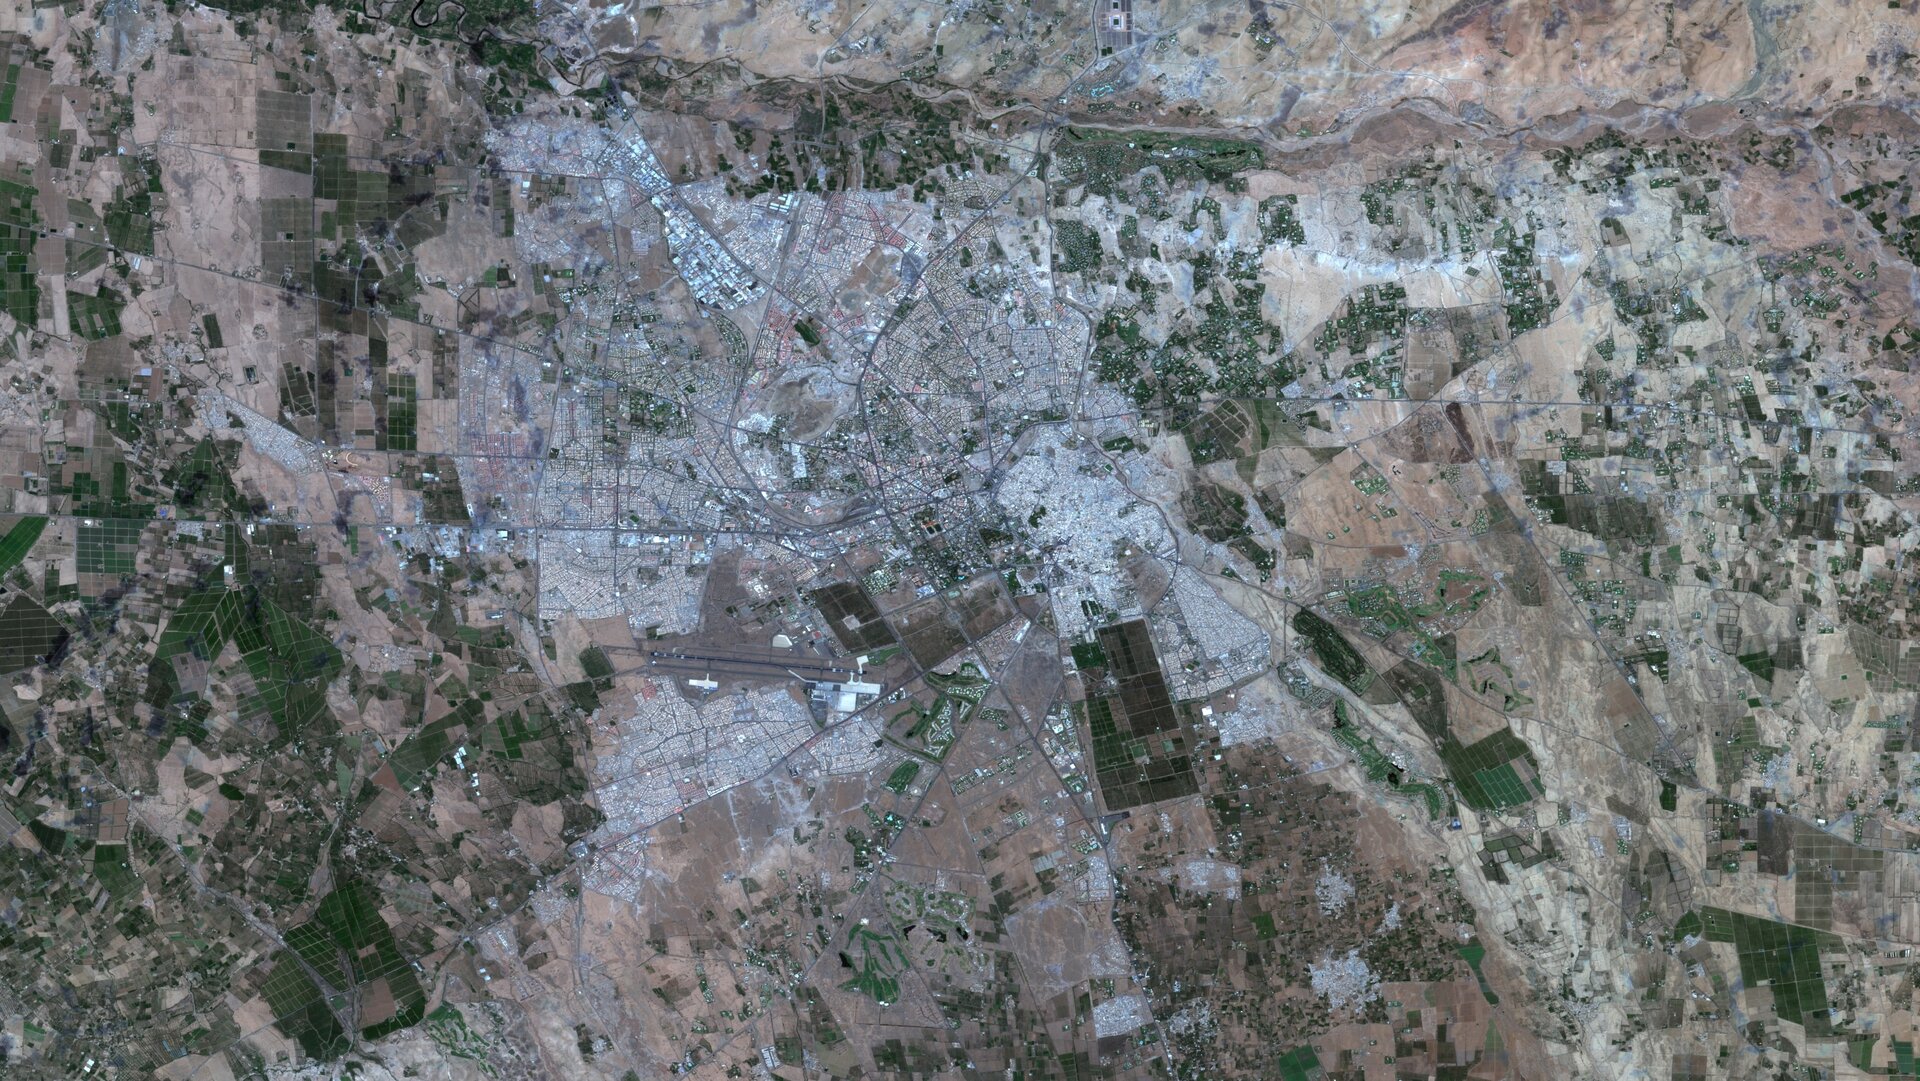 Marrakesh from space